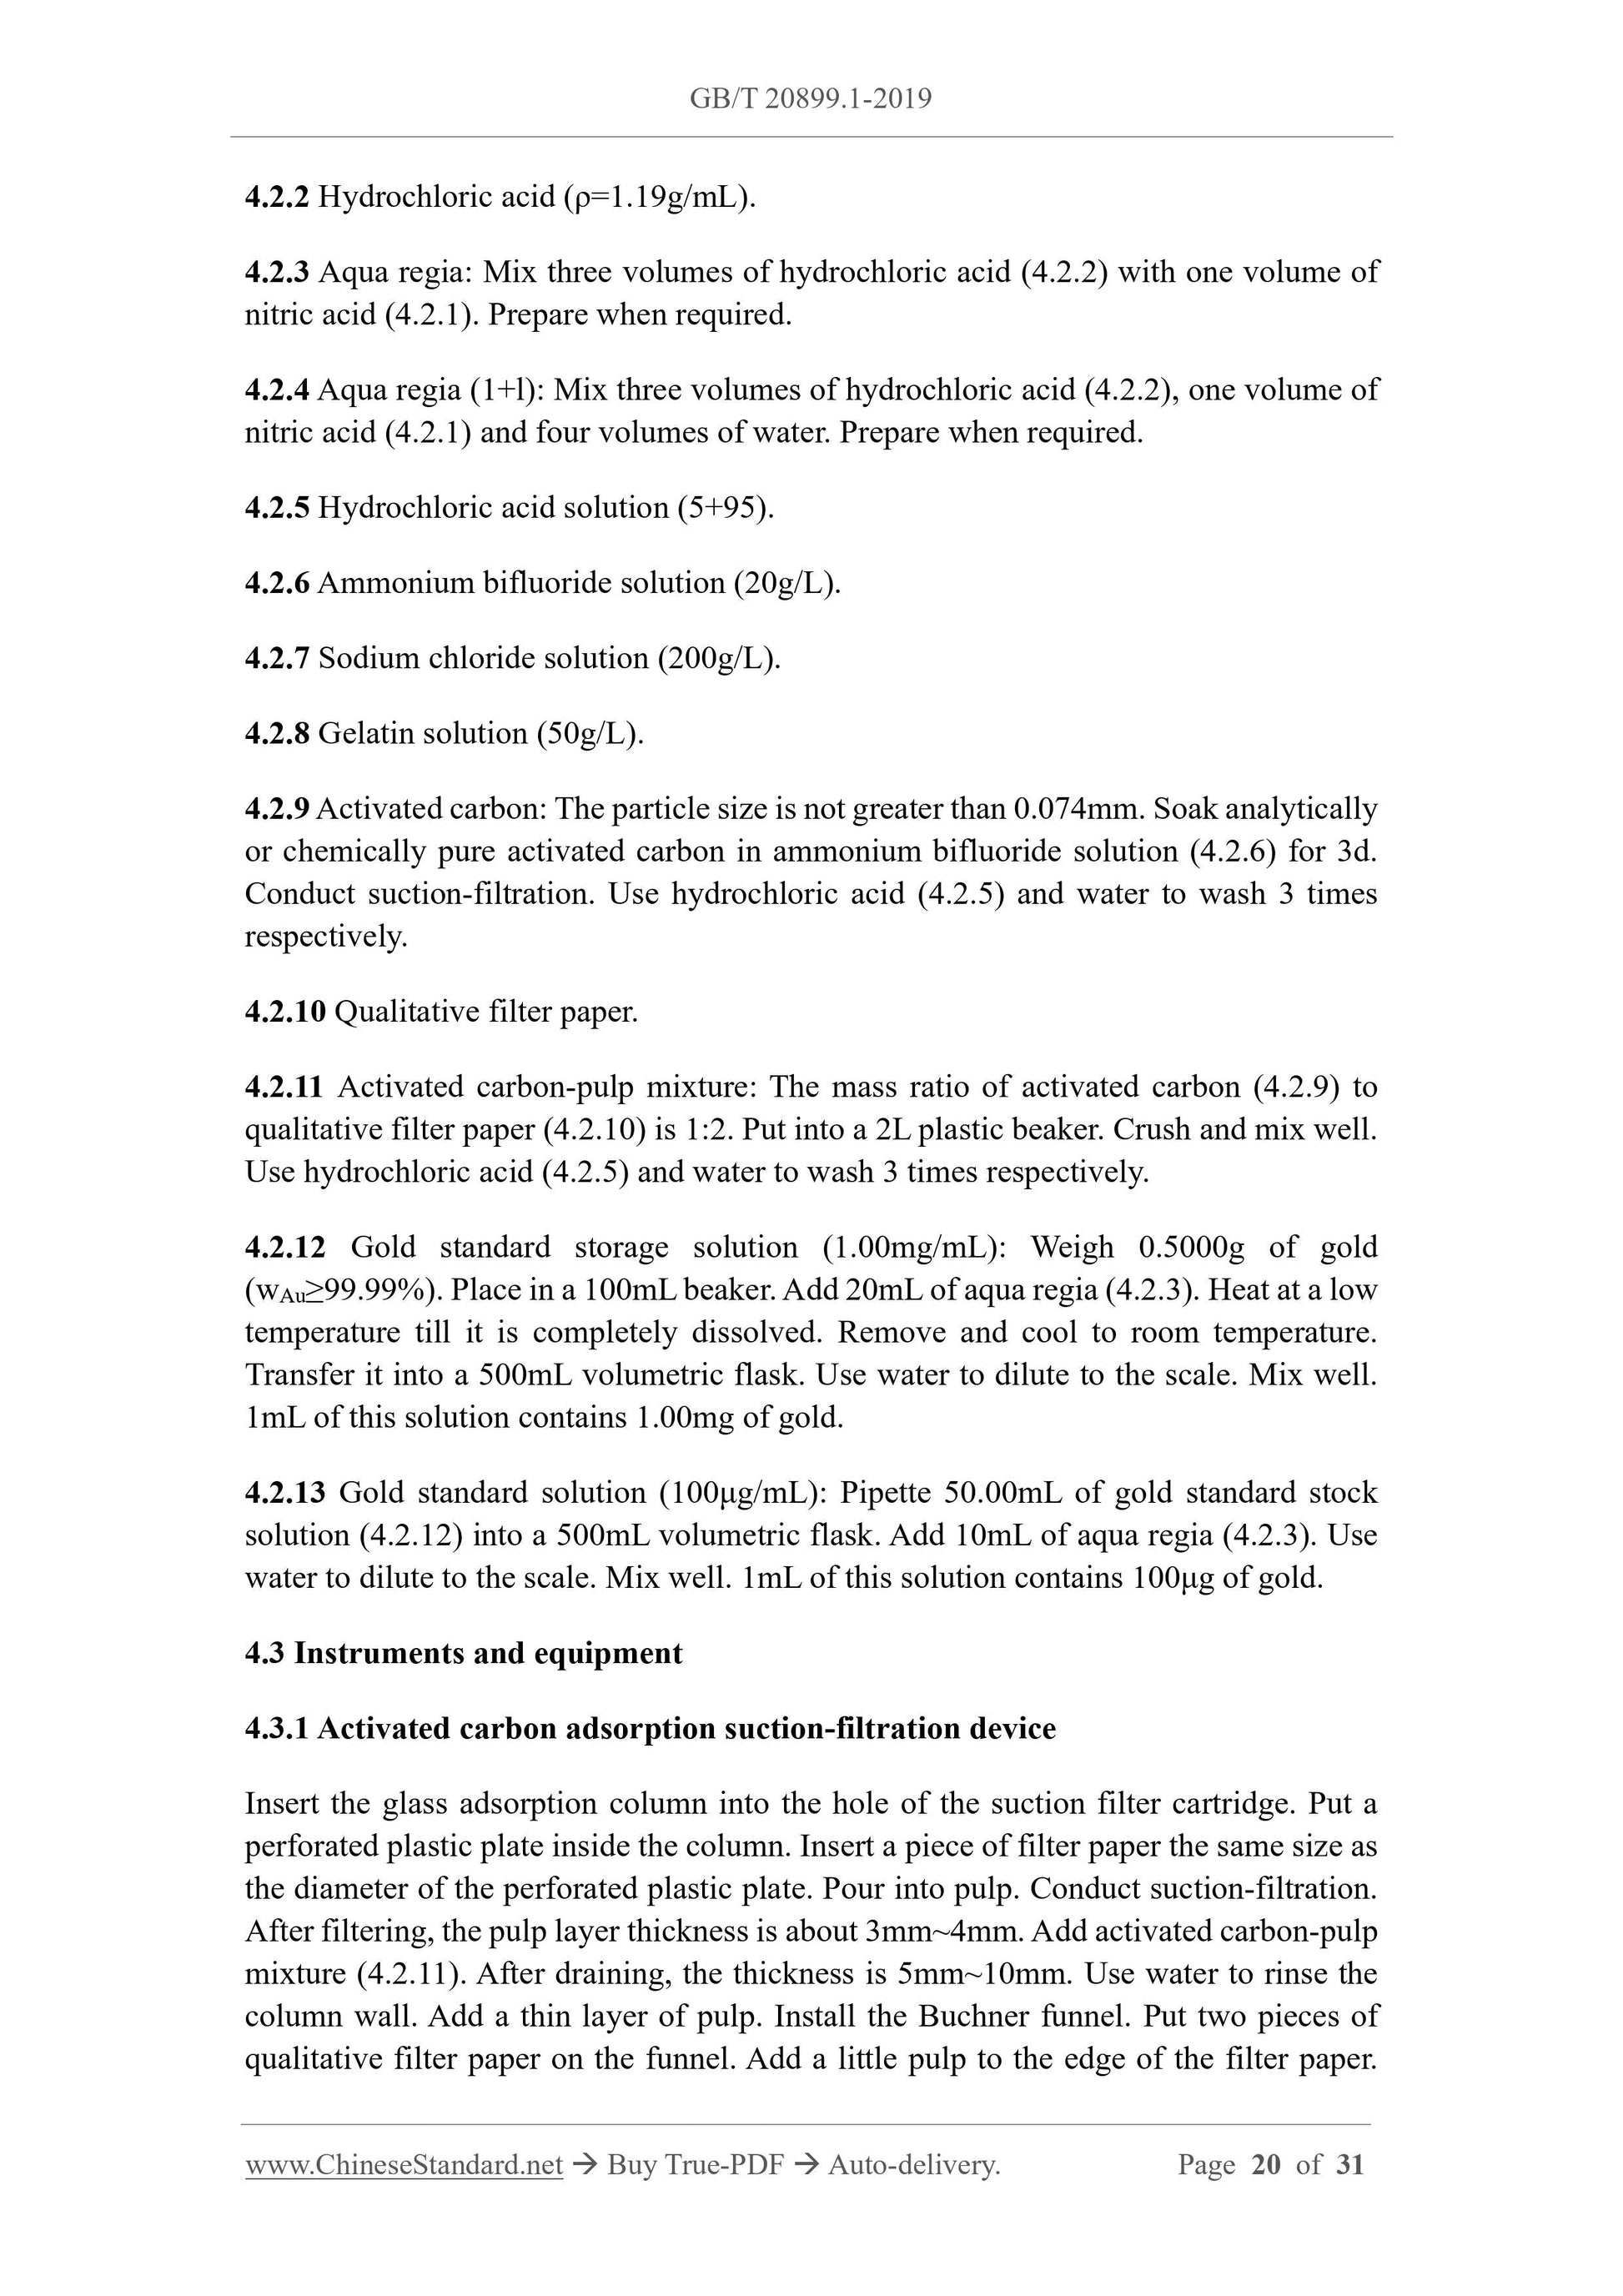 GB/T 20899.1-2019 Page 7